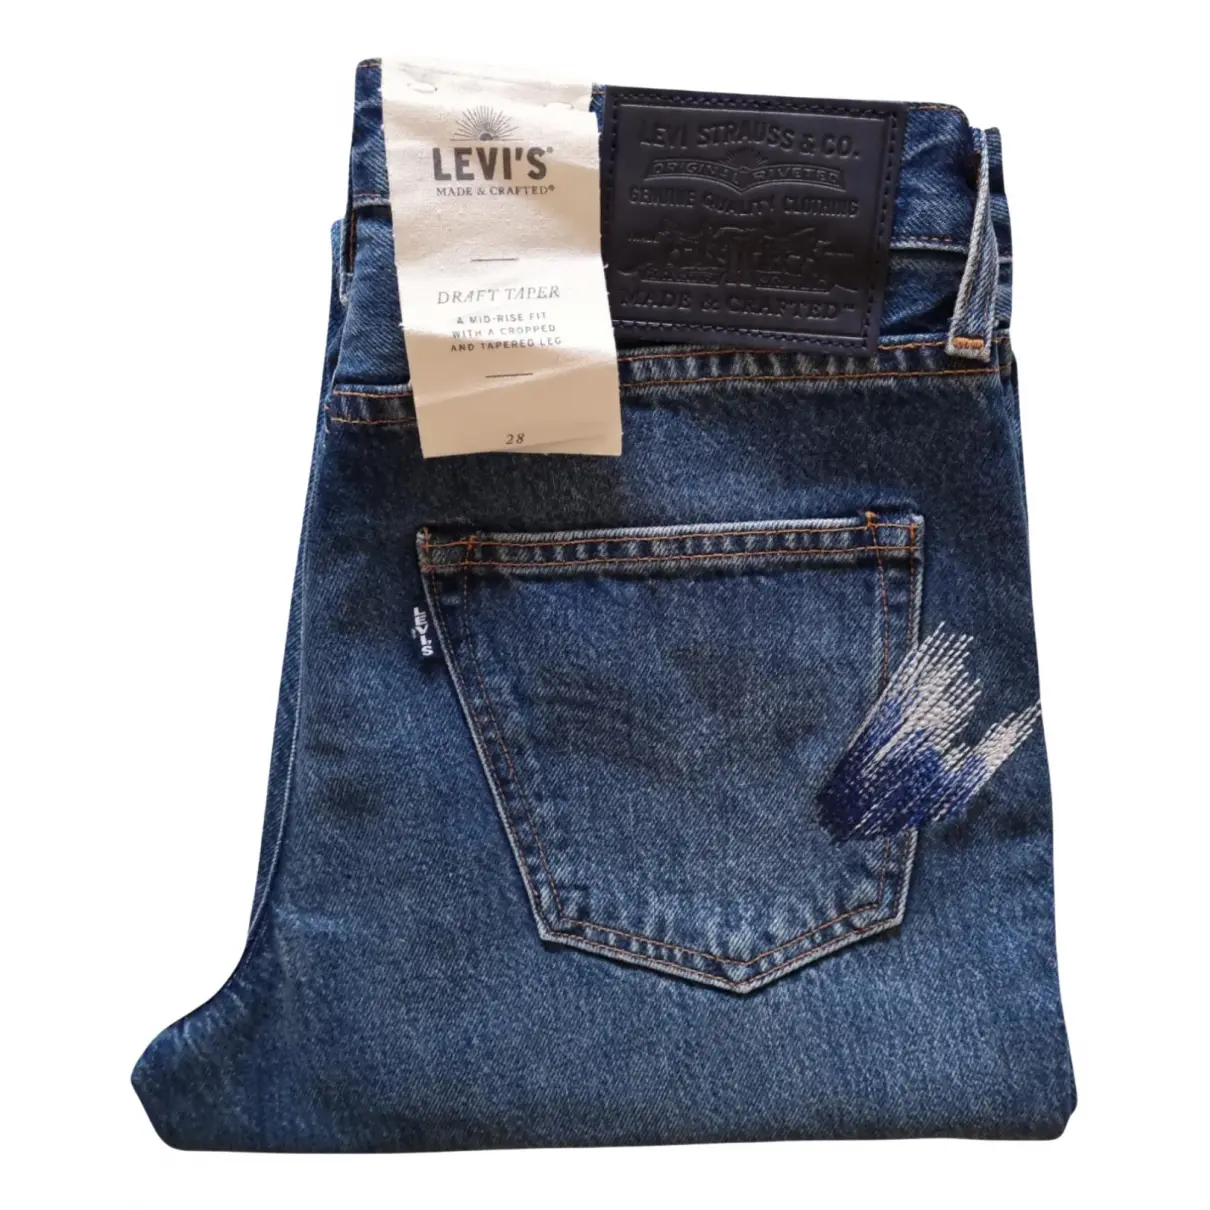 Buy Levi's Made & Crafted Jeans online